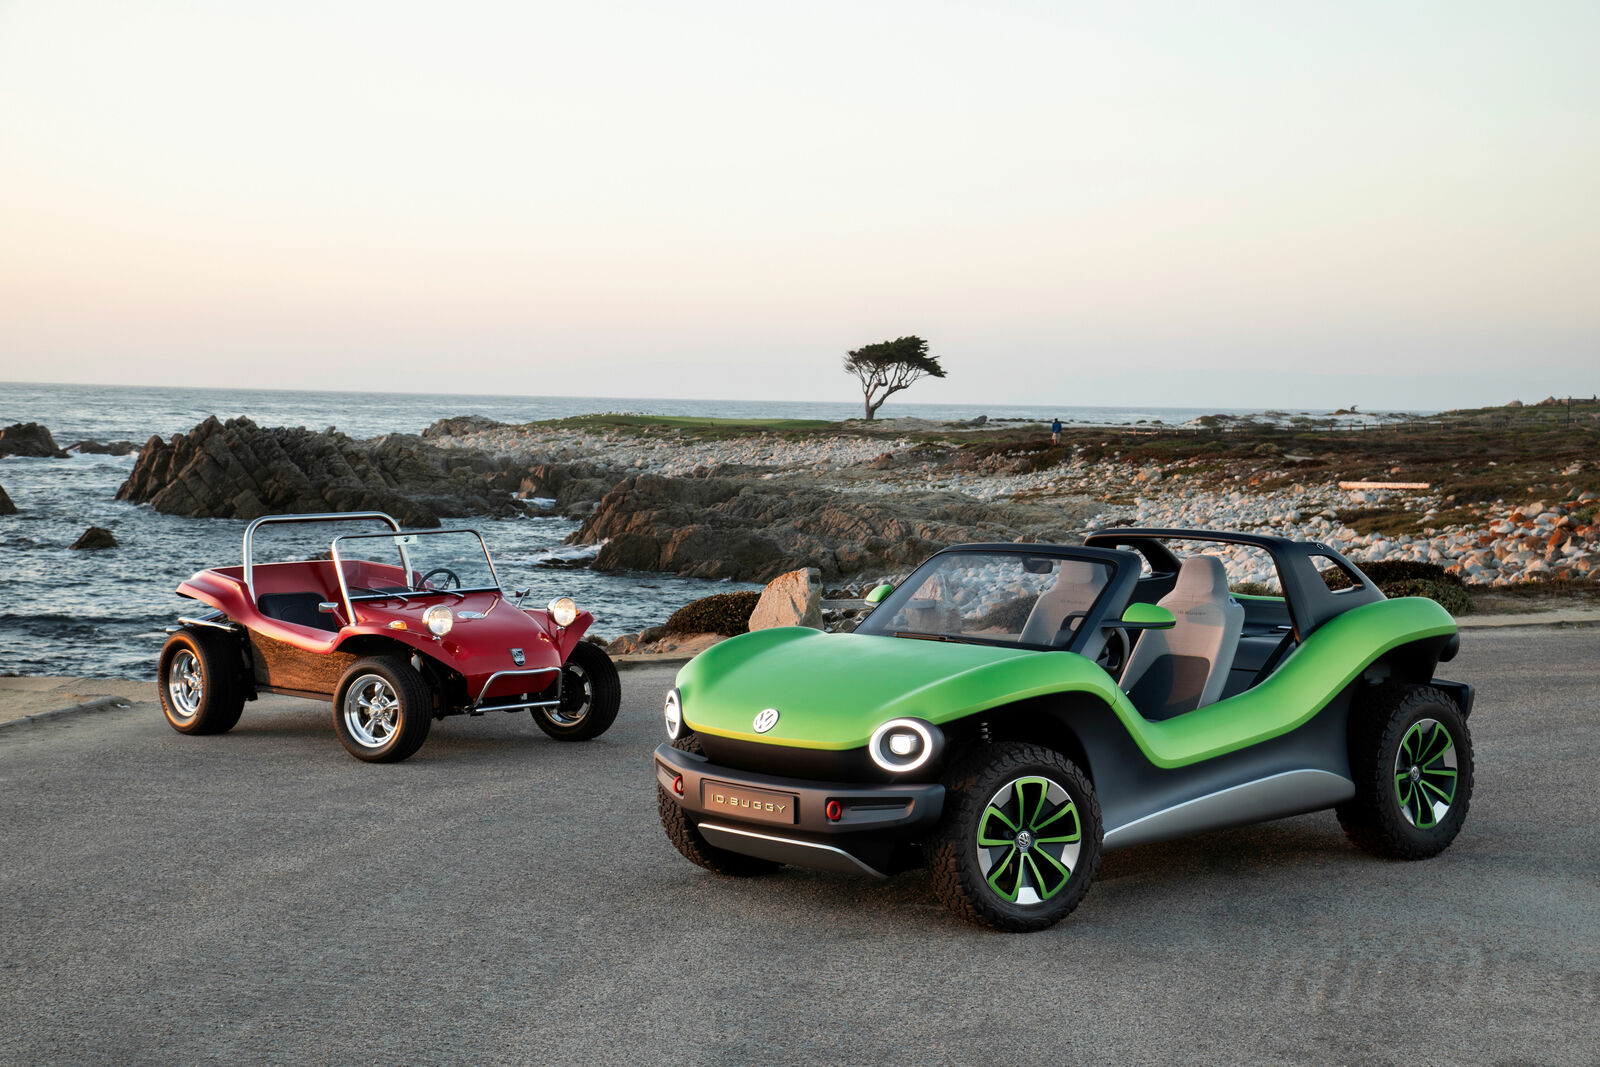 Old and new: Meyers Manx and ID.Buggy